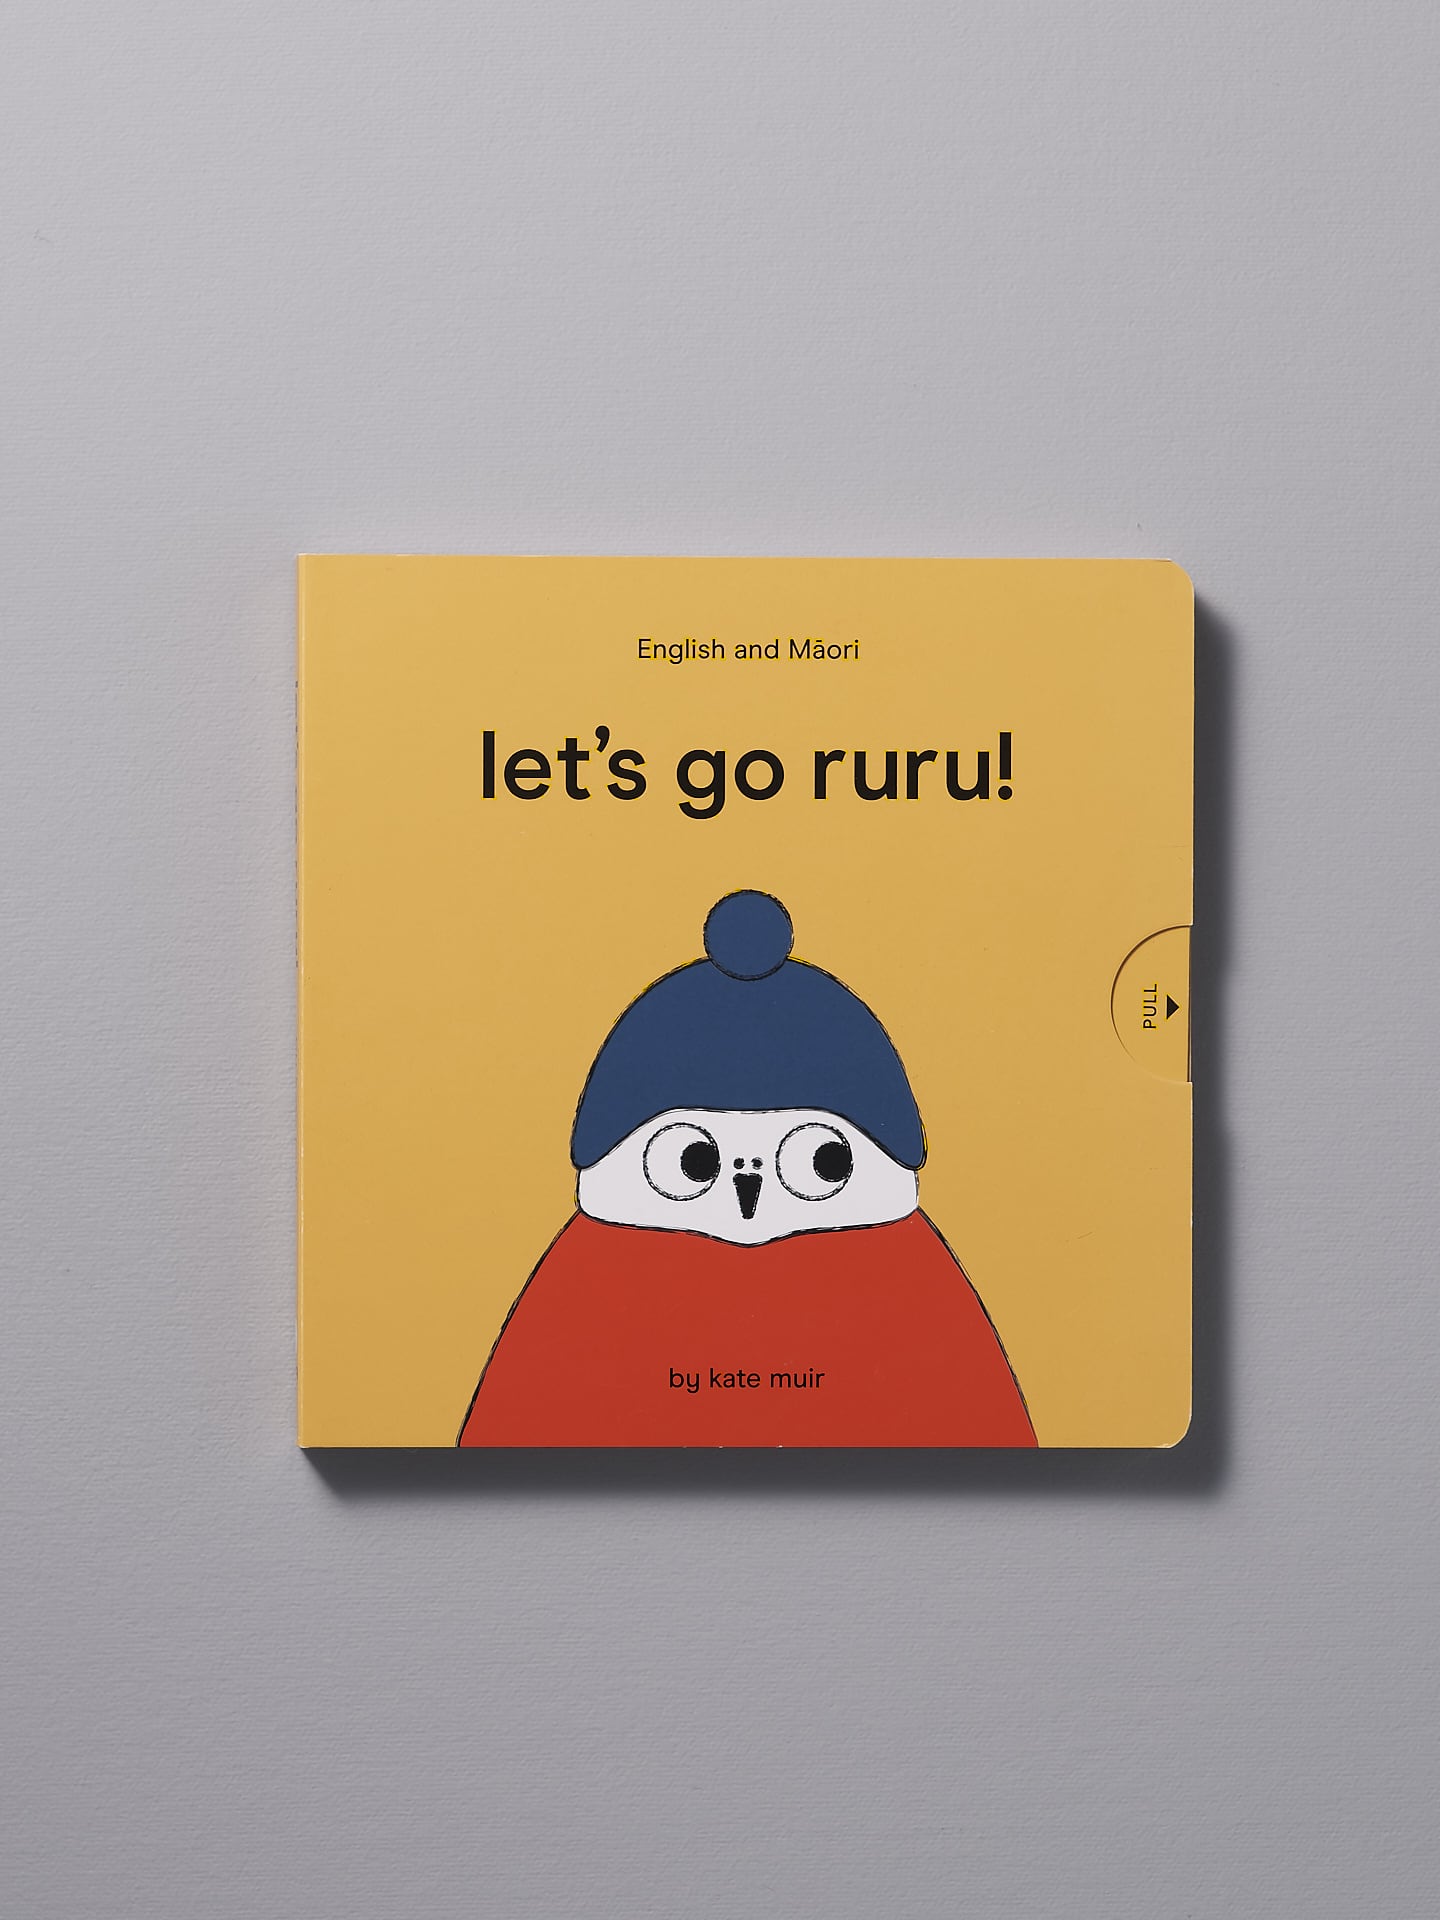 A children's book titled "Let's Go Ruru – by Kate Muir", an exciting adventure featuring English and Te Reo Maori languages, with an illustration of a cartoon owl on the cover